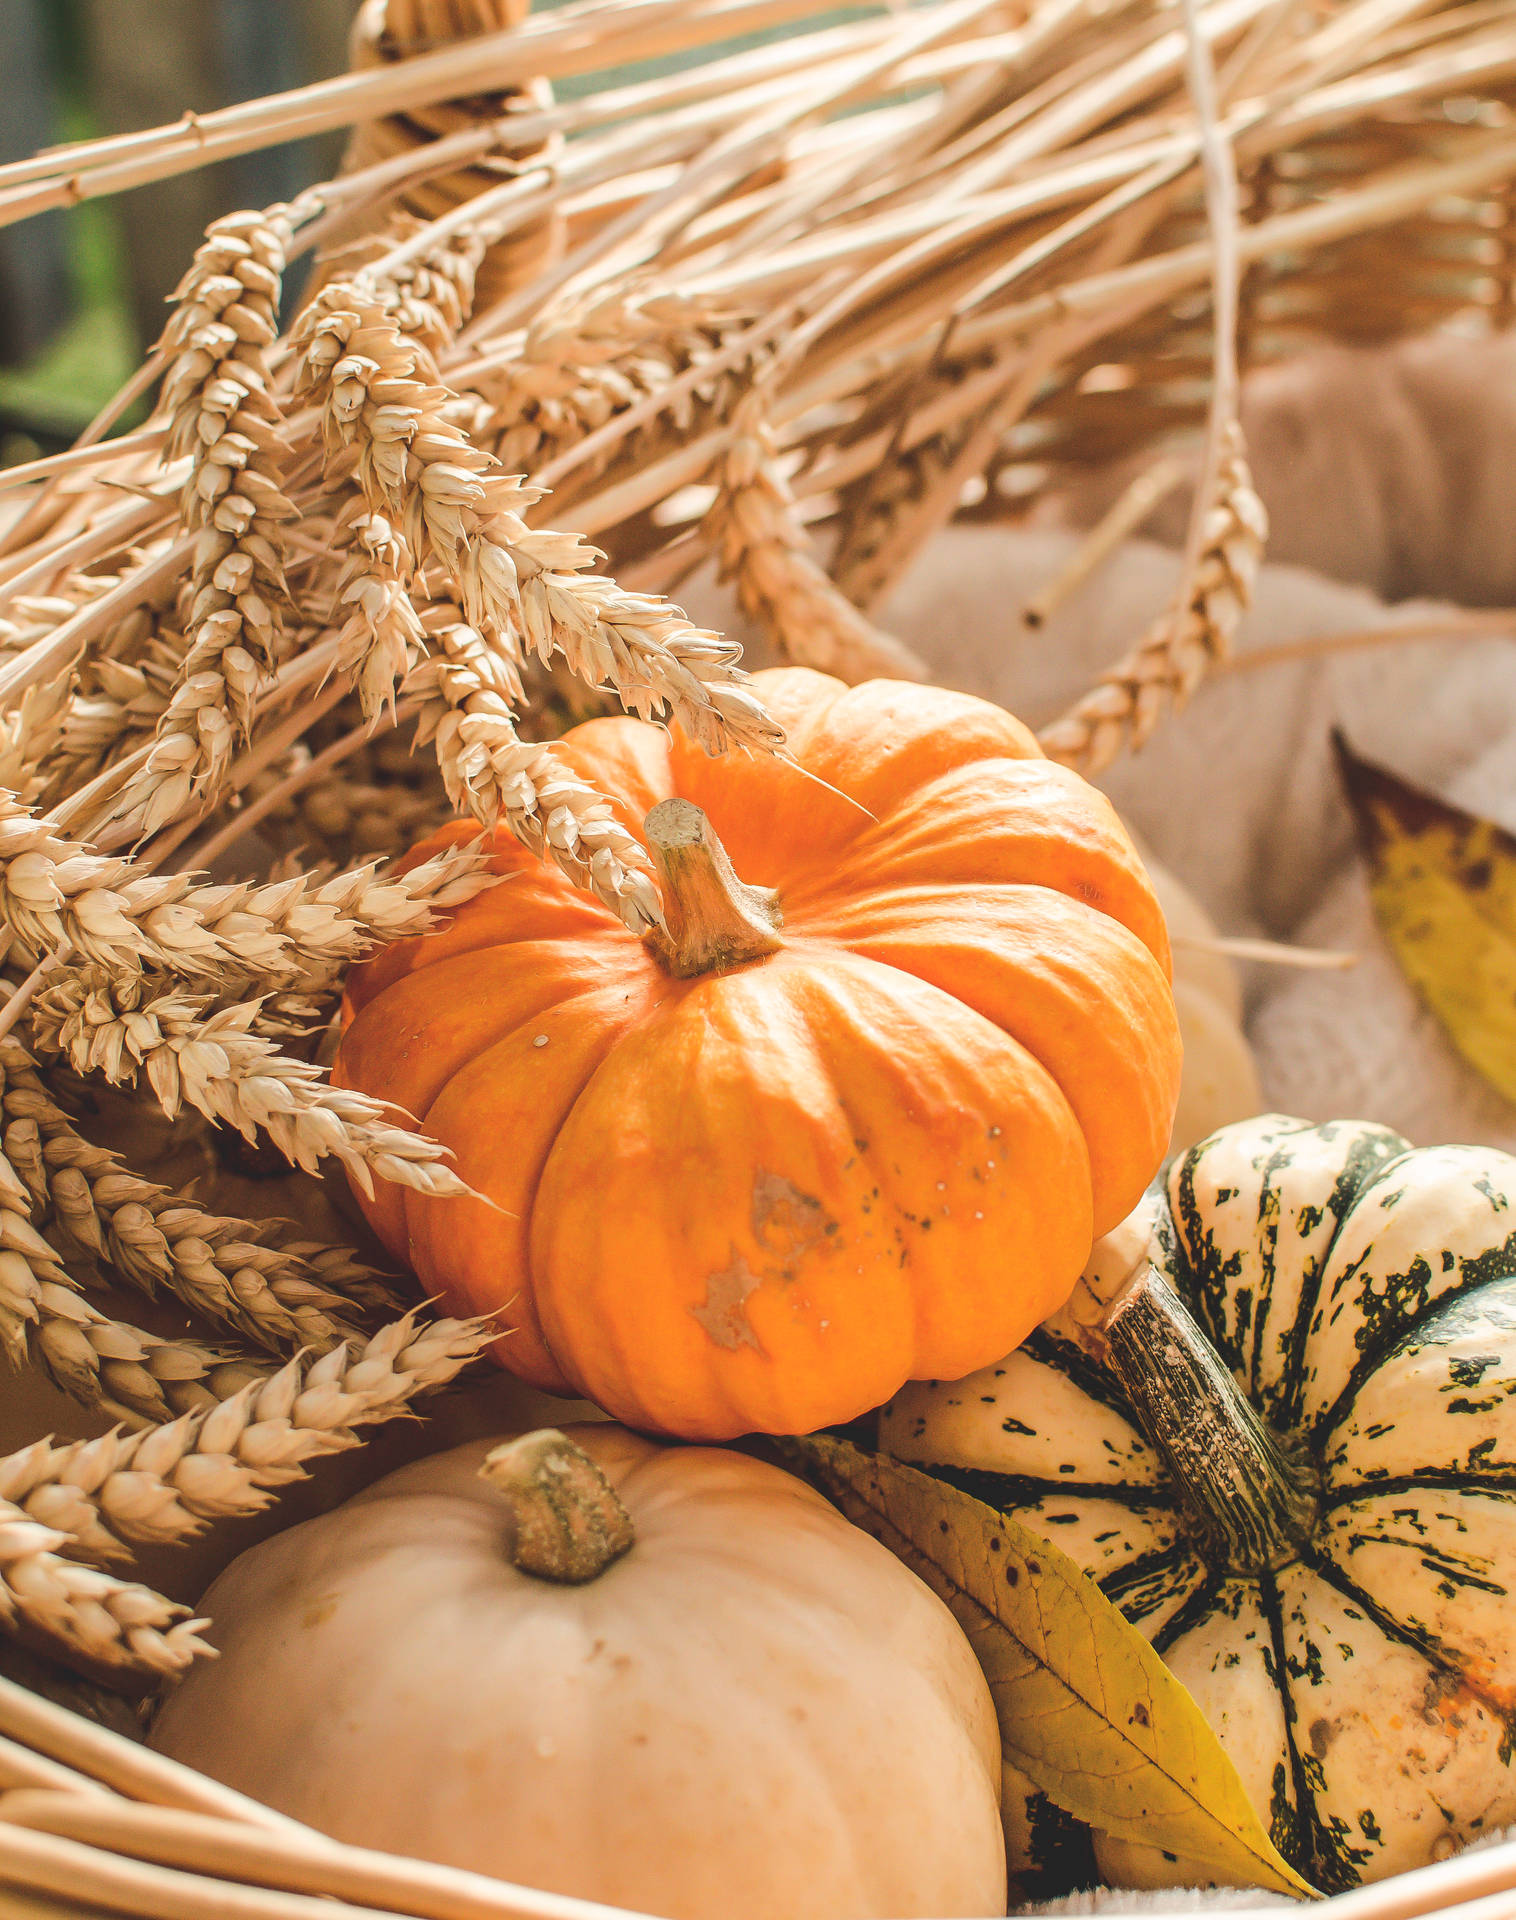 Pumpkins And Wheat Background